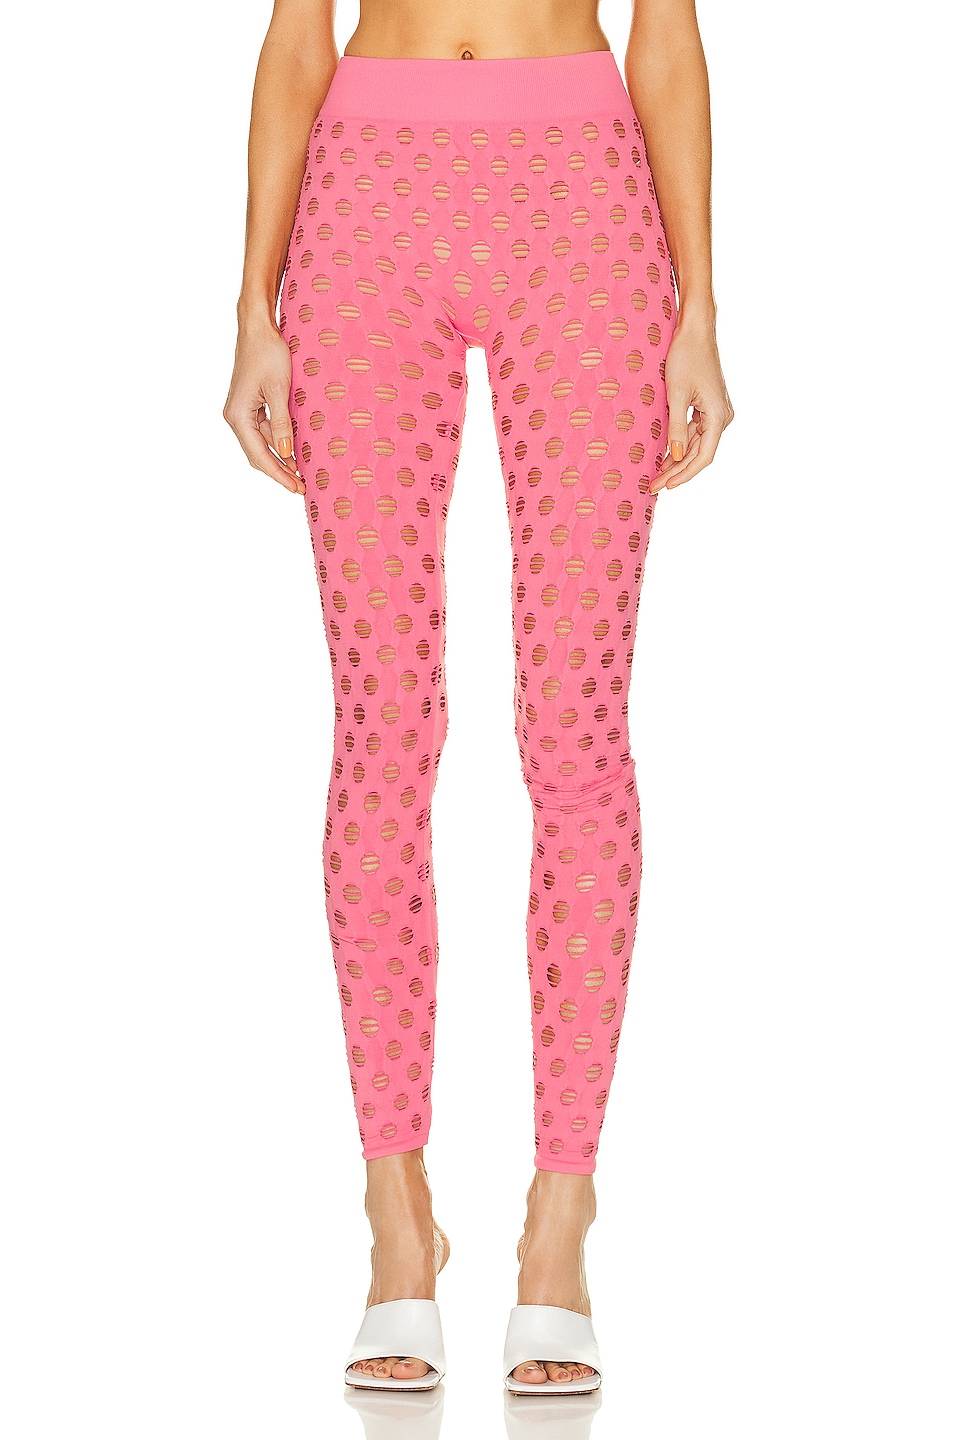 Image 1 of Maisie Wilen Perforated Legging in Pink